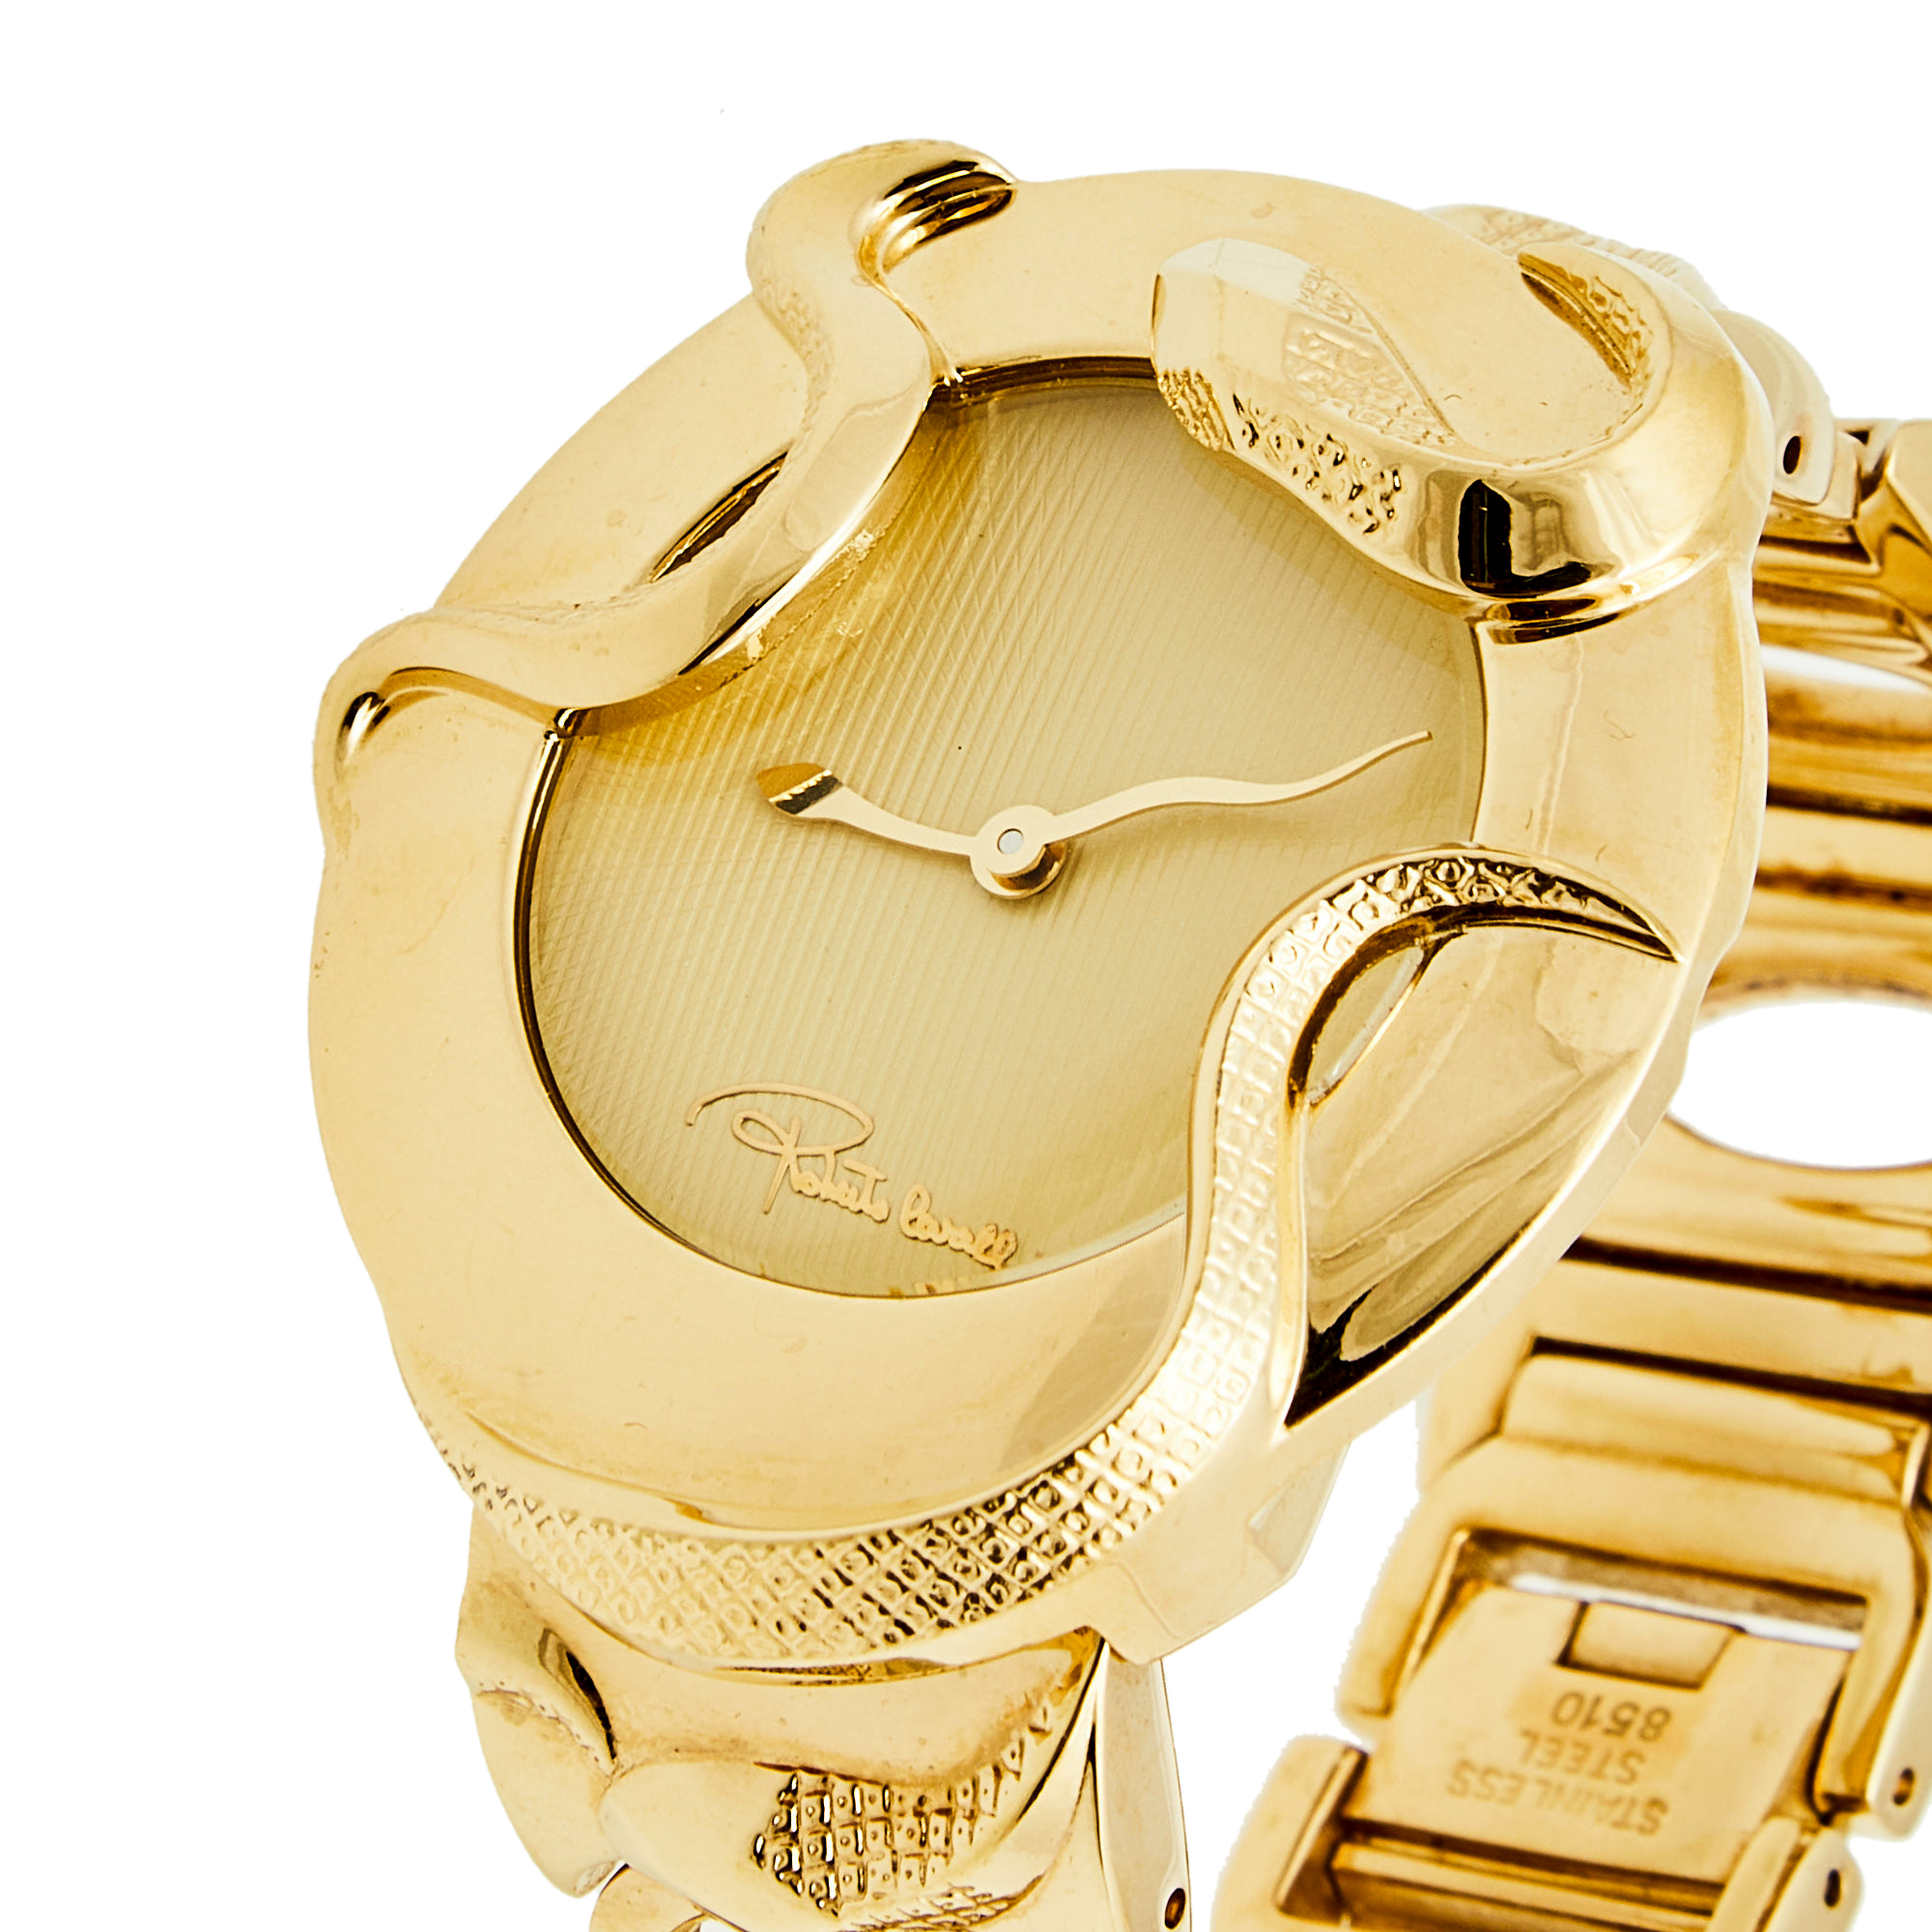 

Roberto Cavalli Champagne Yellow Gold Plated Stainless Steel Snake R7253165517 Women's Wristwatch